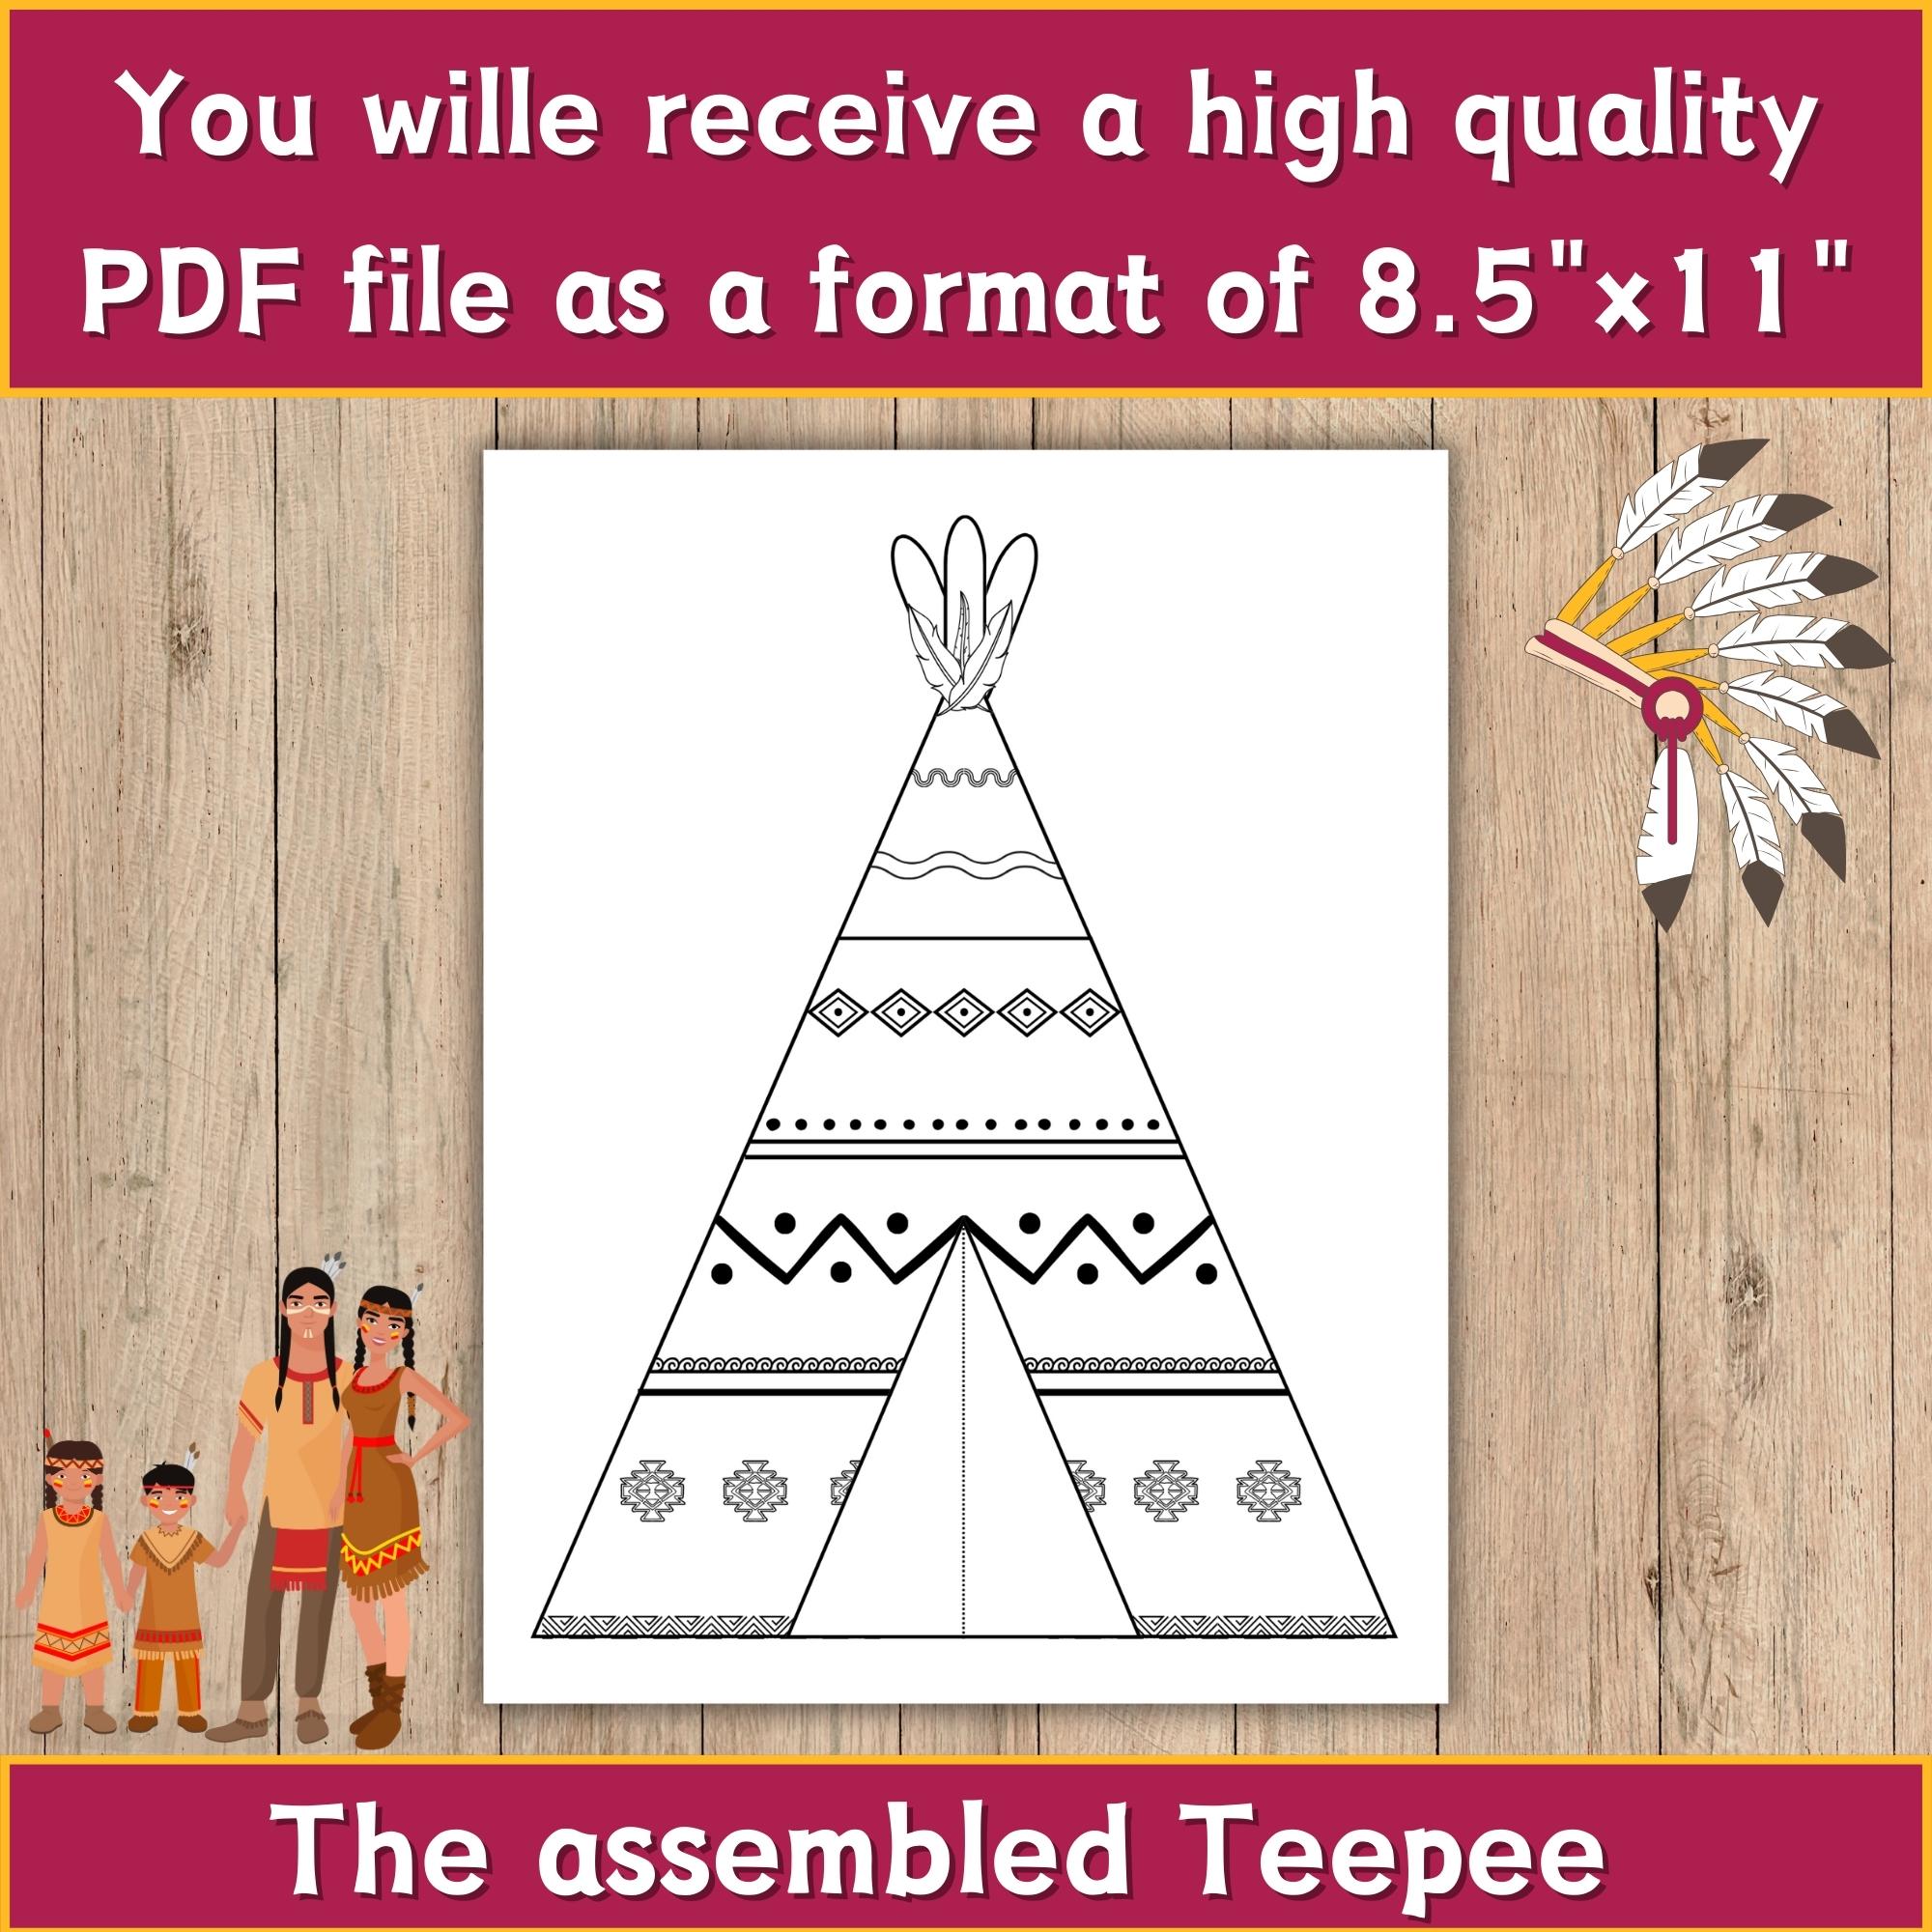 Build a teepeetipi native americans crafts design your own teepee template create a teepeetipi made by teachers